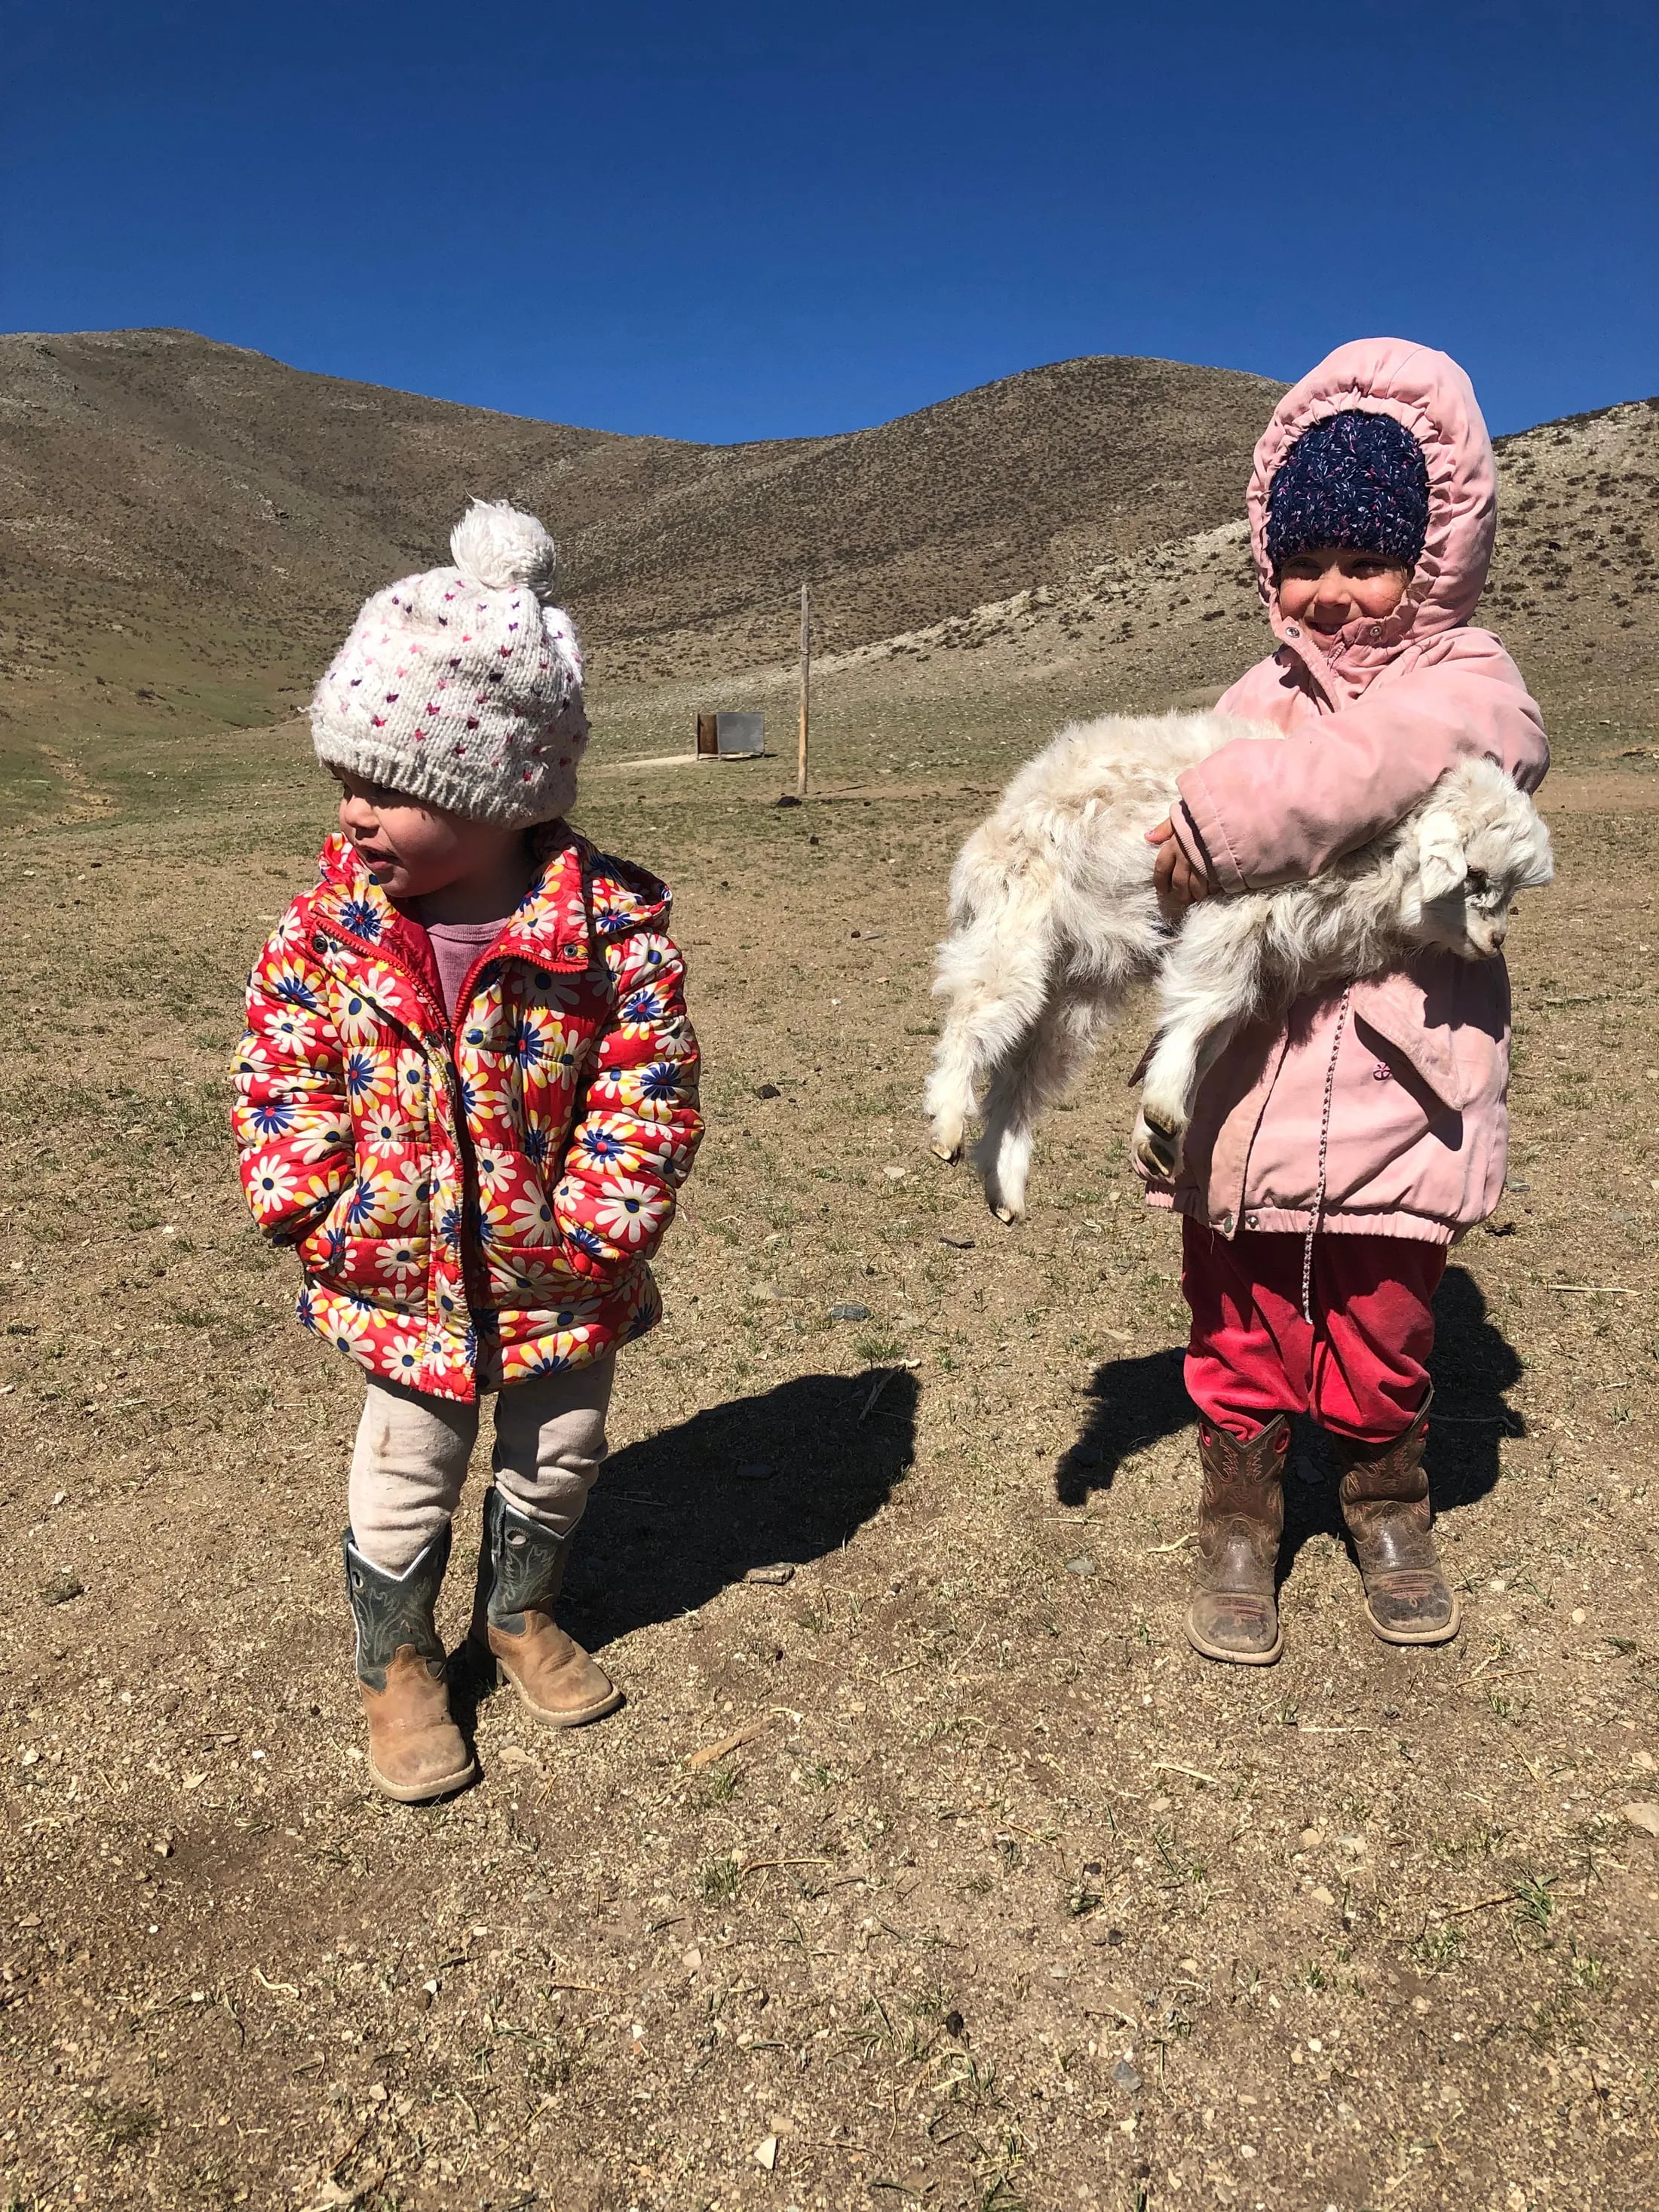 On the Mongolian steppe: No phone, no pool, no pets (., don't get  attached to the animals)